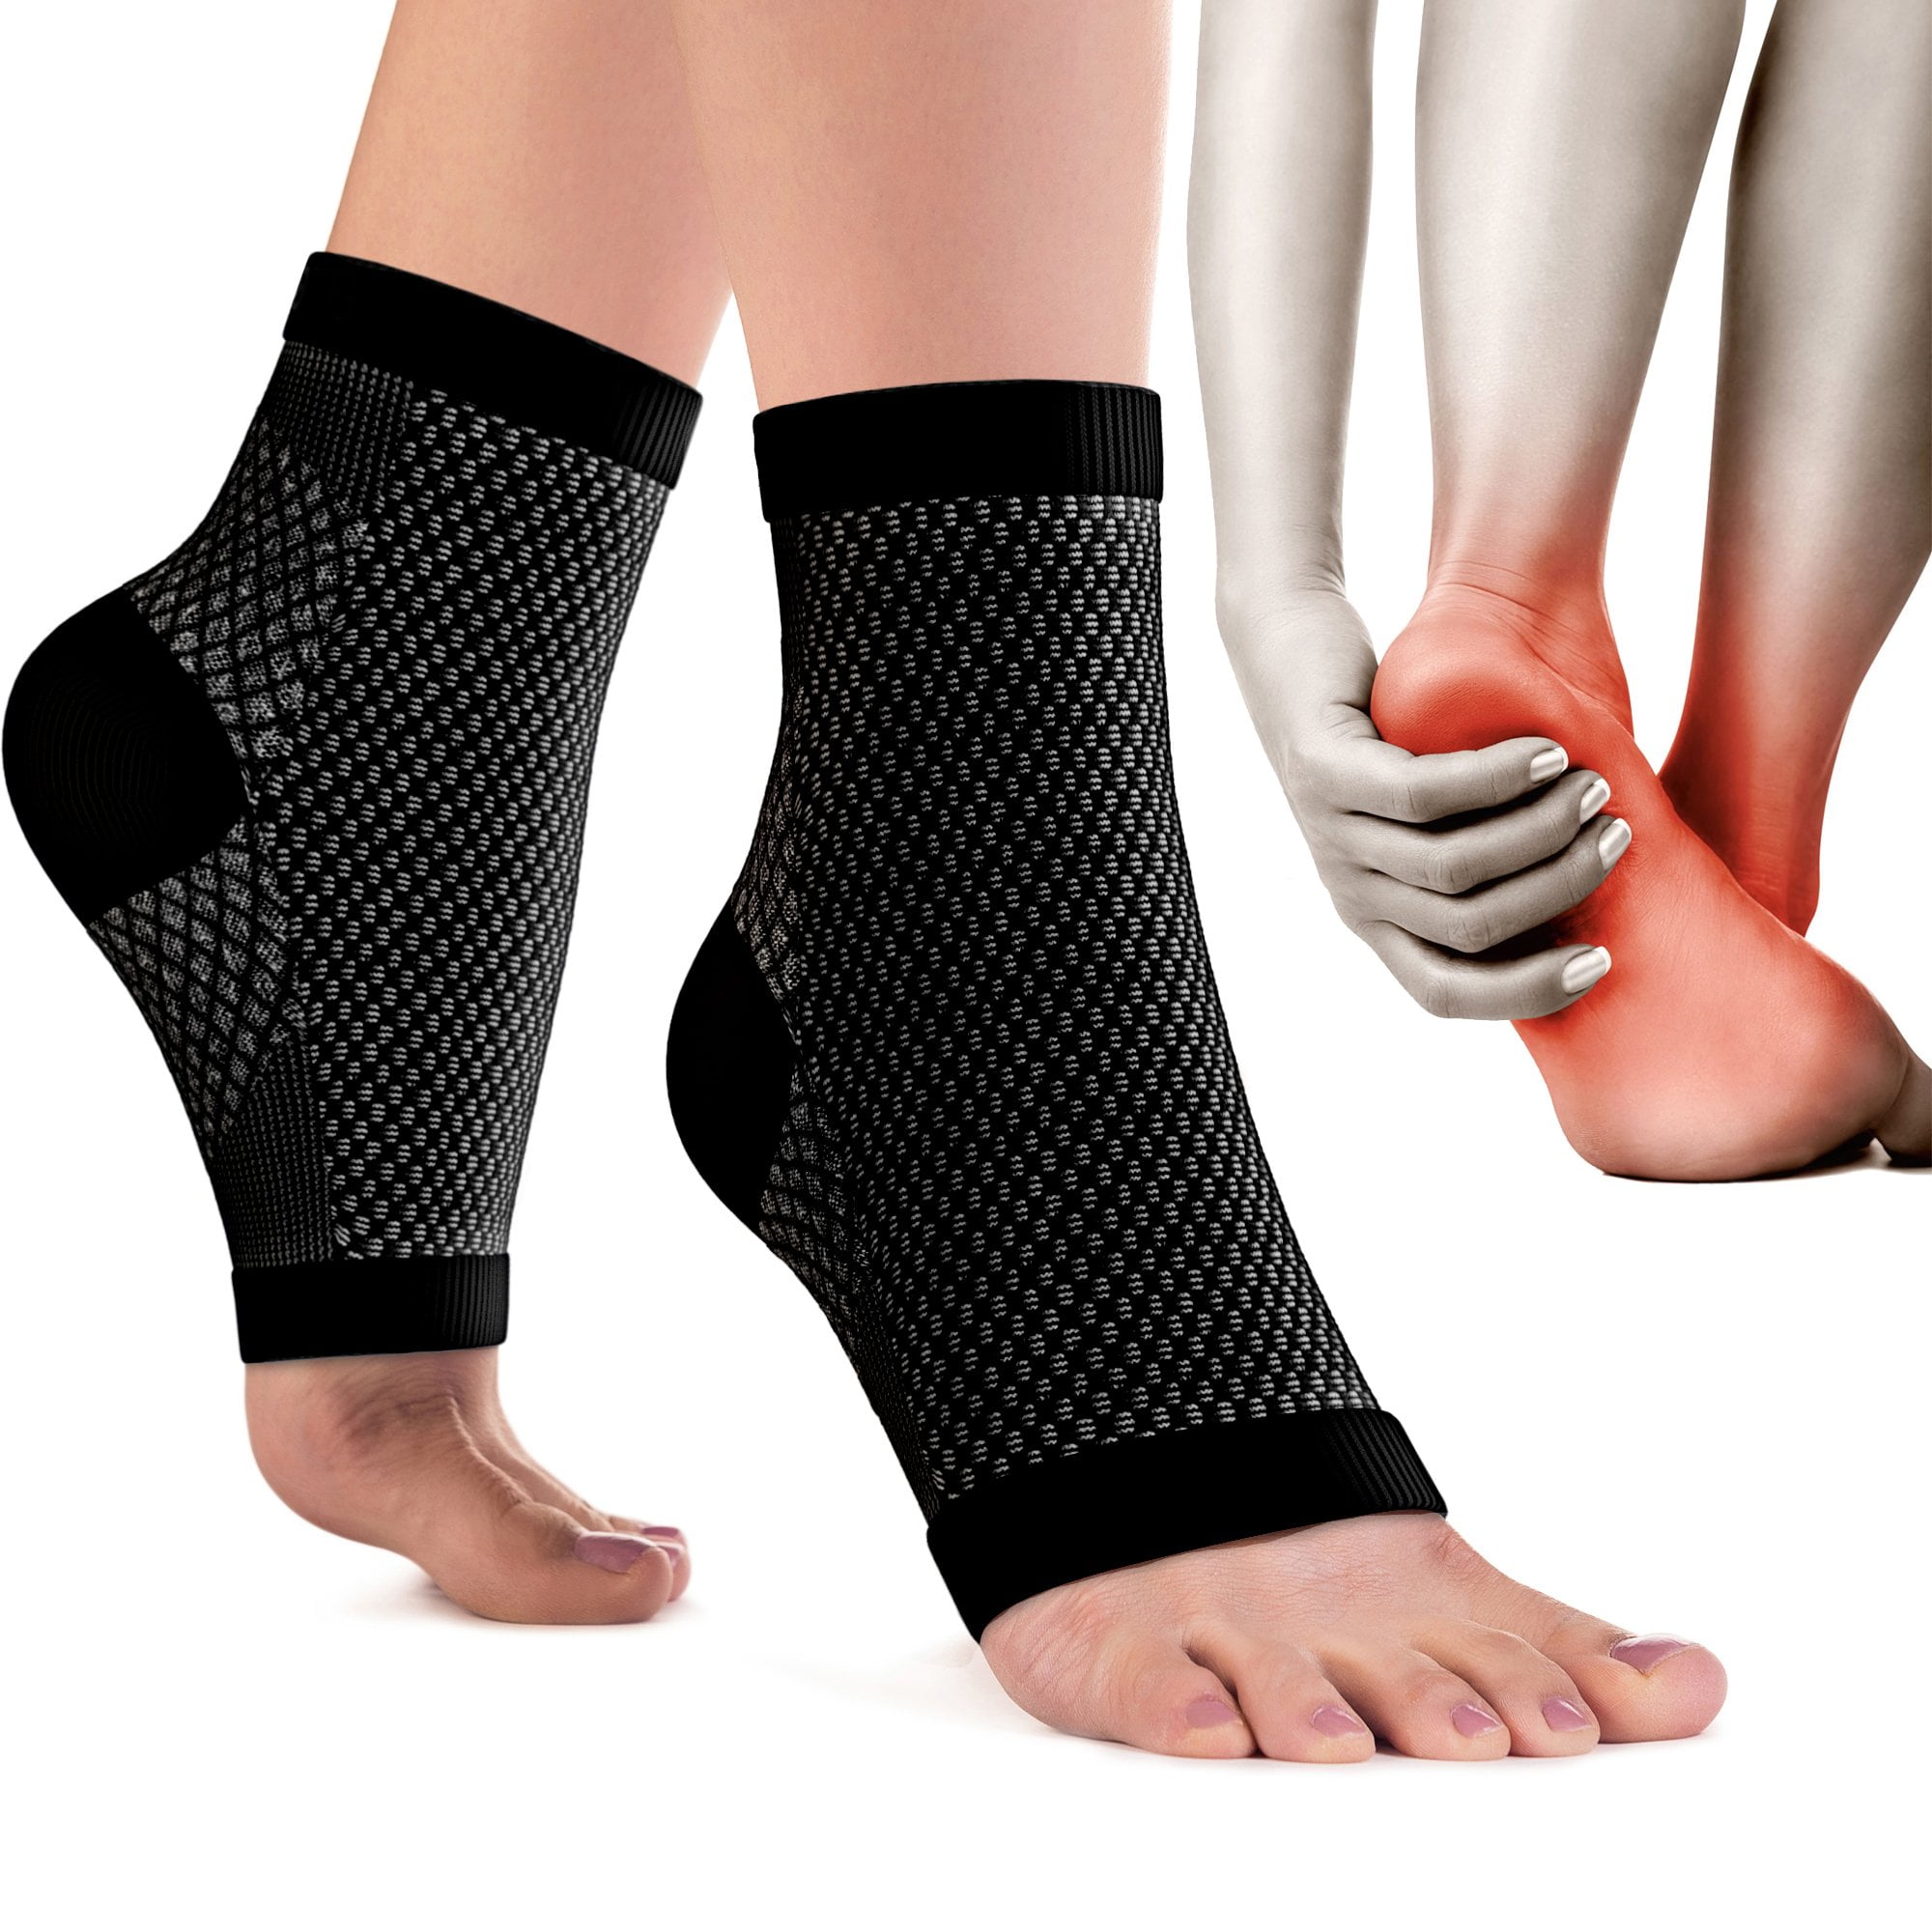 Plantar Fasciitis Socks - 7 Zone Compression Ankle Sleeves for Fast ...